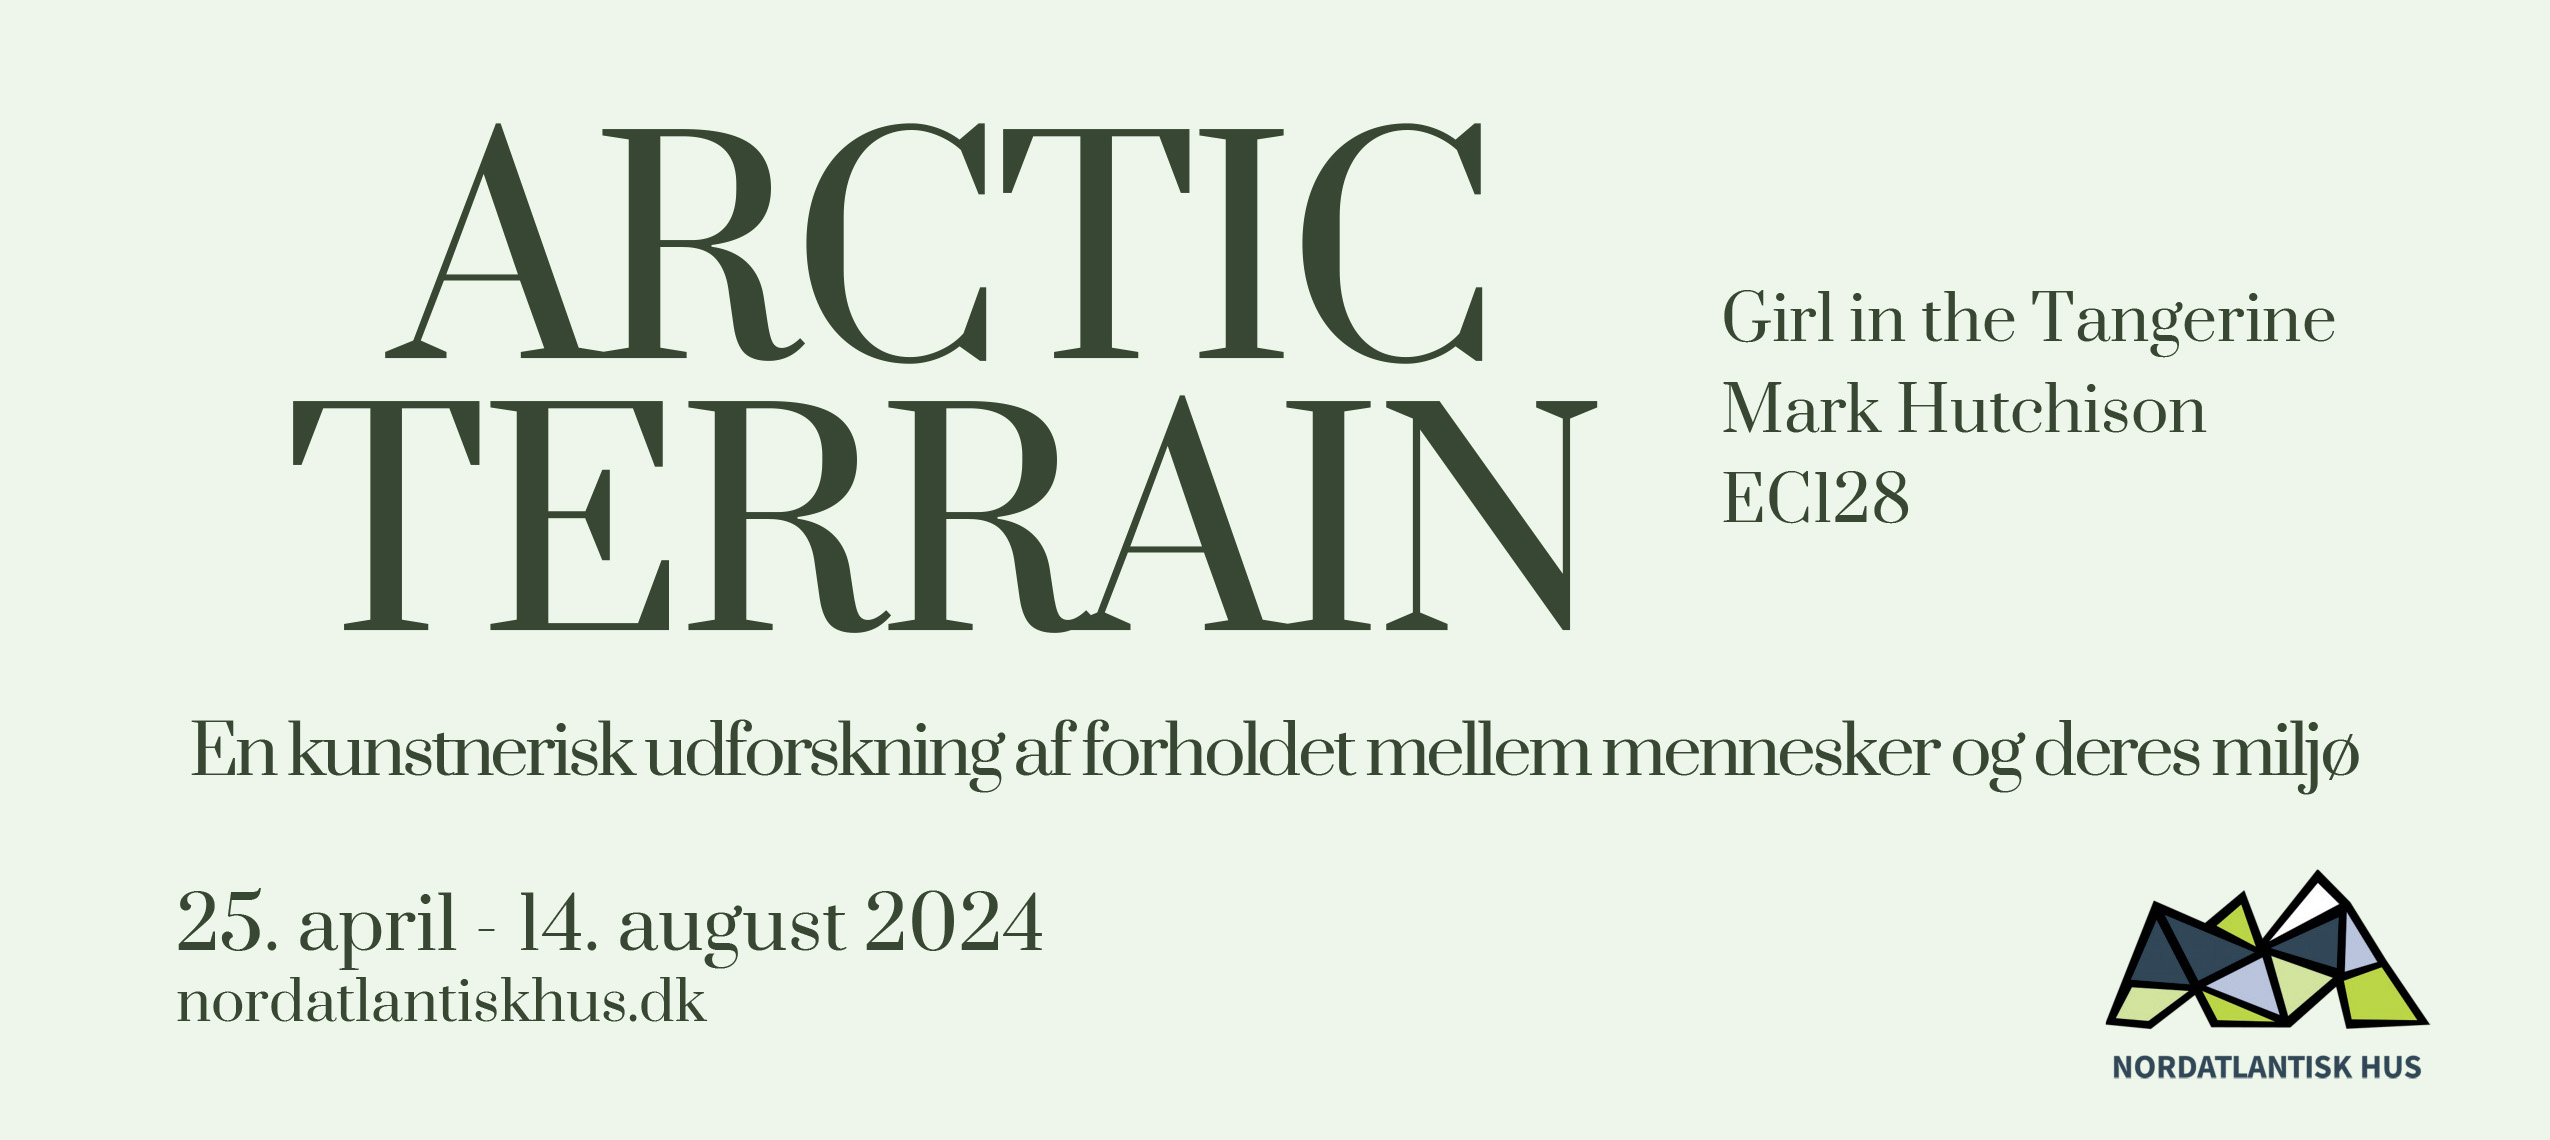 Arctic Terrain flyer - Exhibition at Nordatlantisk Hus, Odense, Denmark from 25th April to 14th August 2024